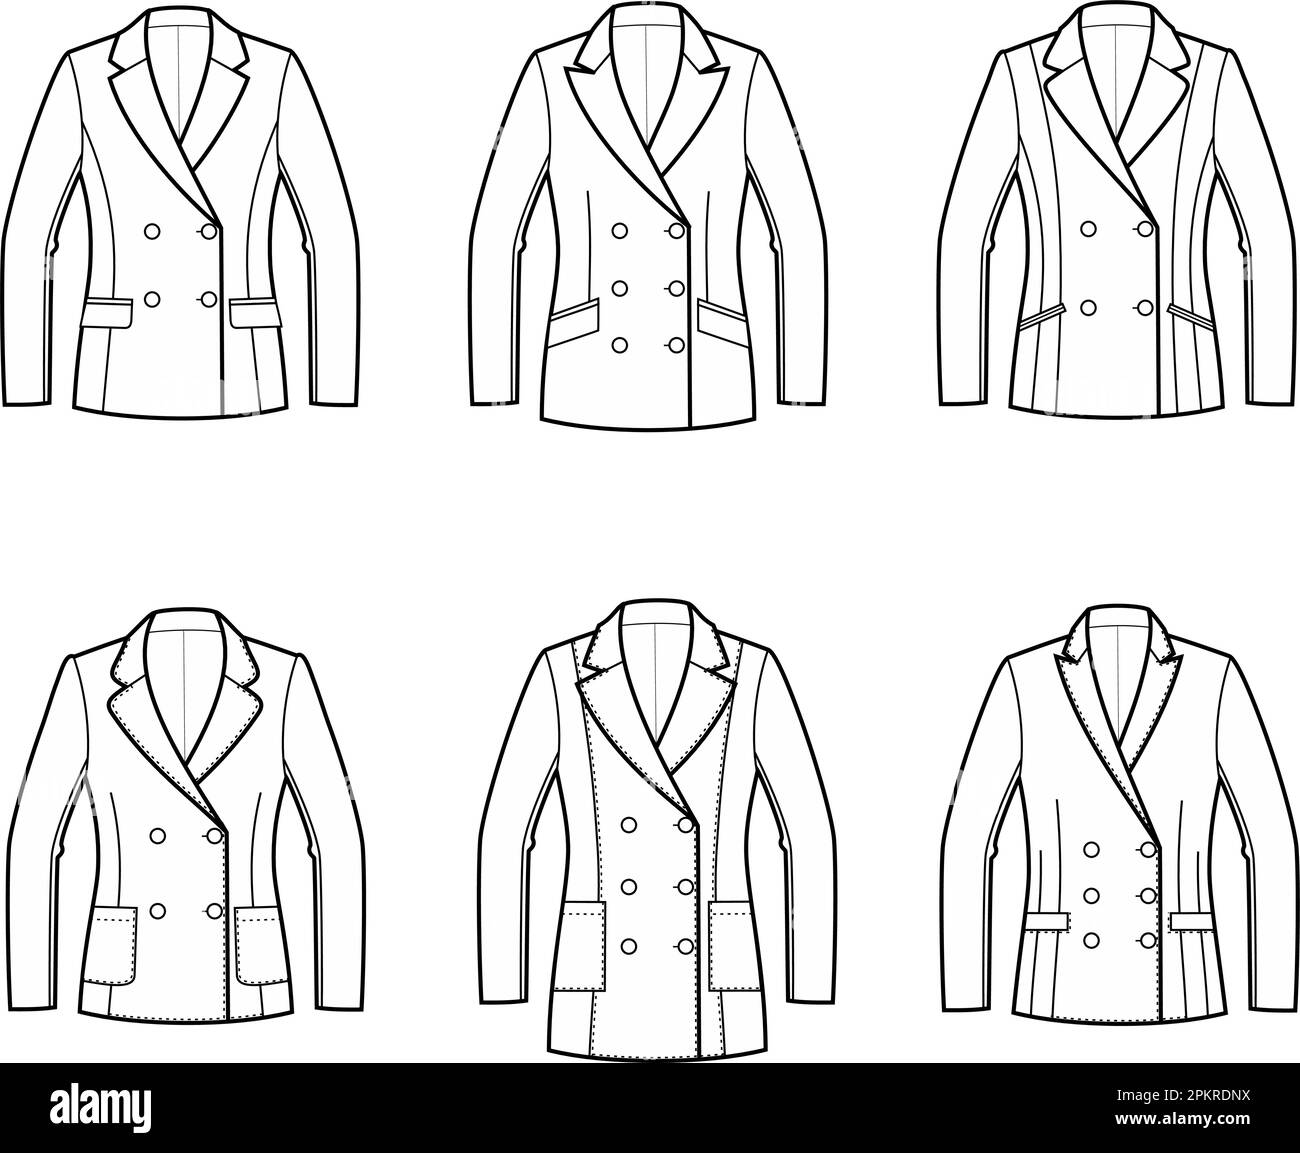 Womens business suit jacket. Fashion CAD.  Stock Vector